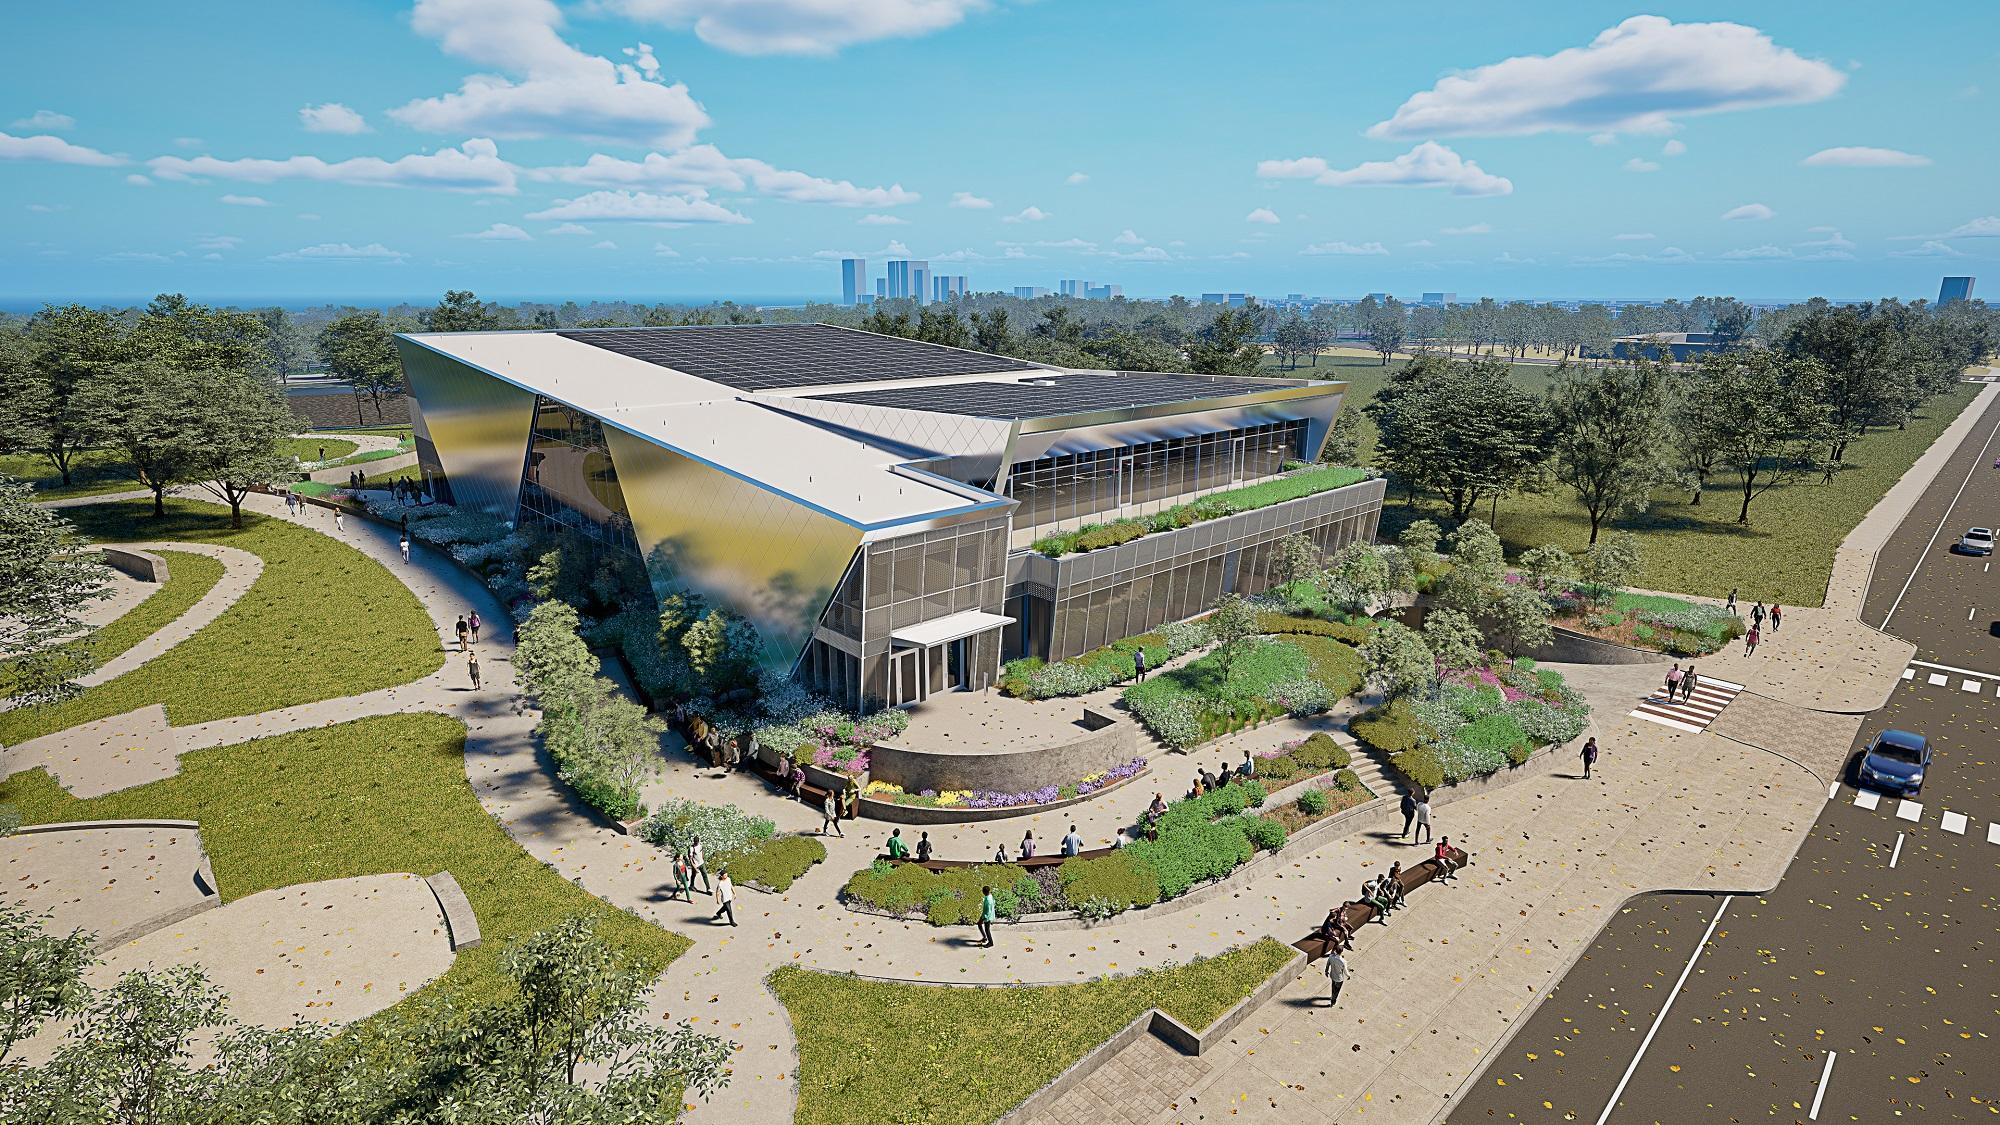 A rendering of the Obama Presidential Center’s athletic and conference center, designed by Moody Nolan. (Credit: Obama Foundation)